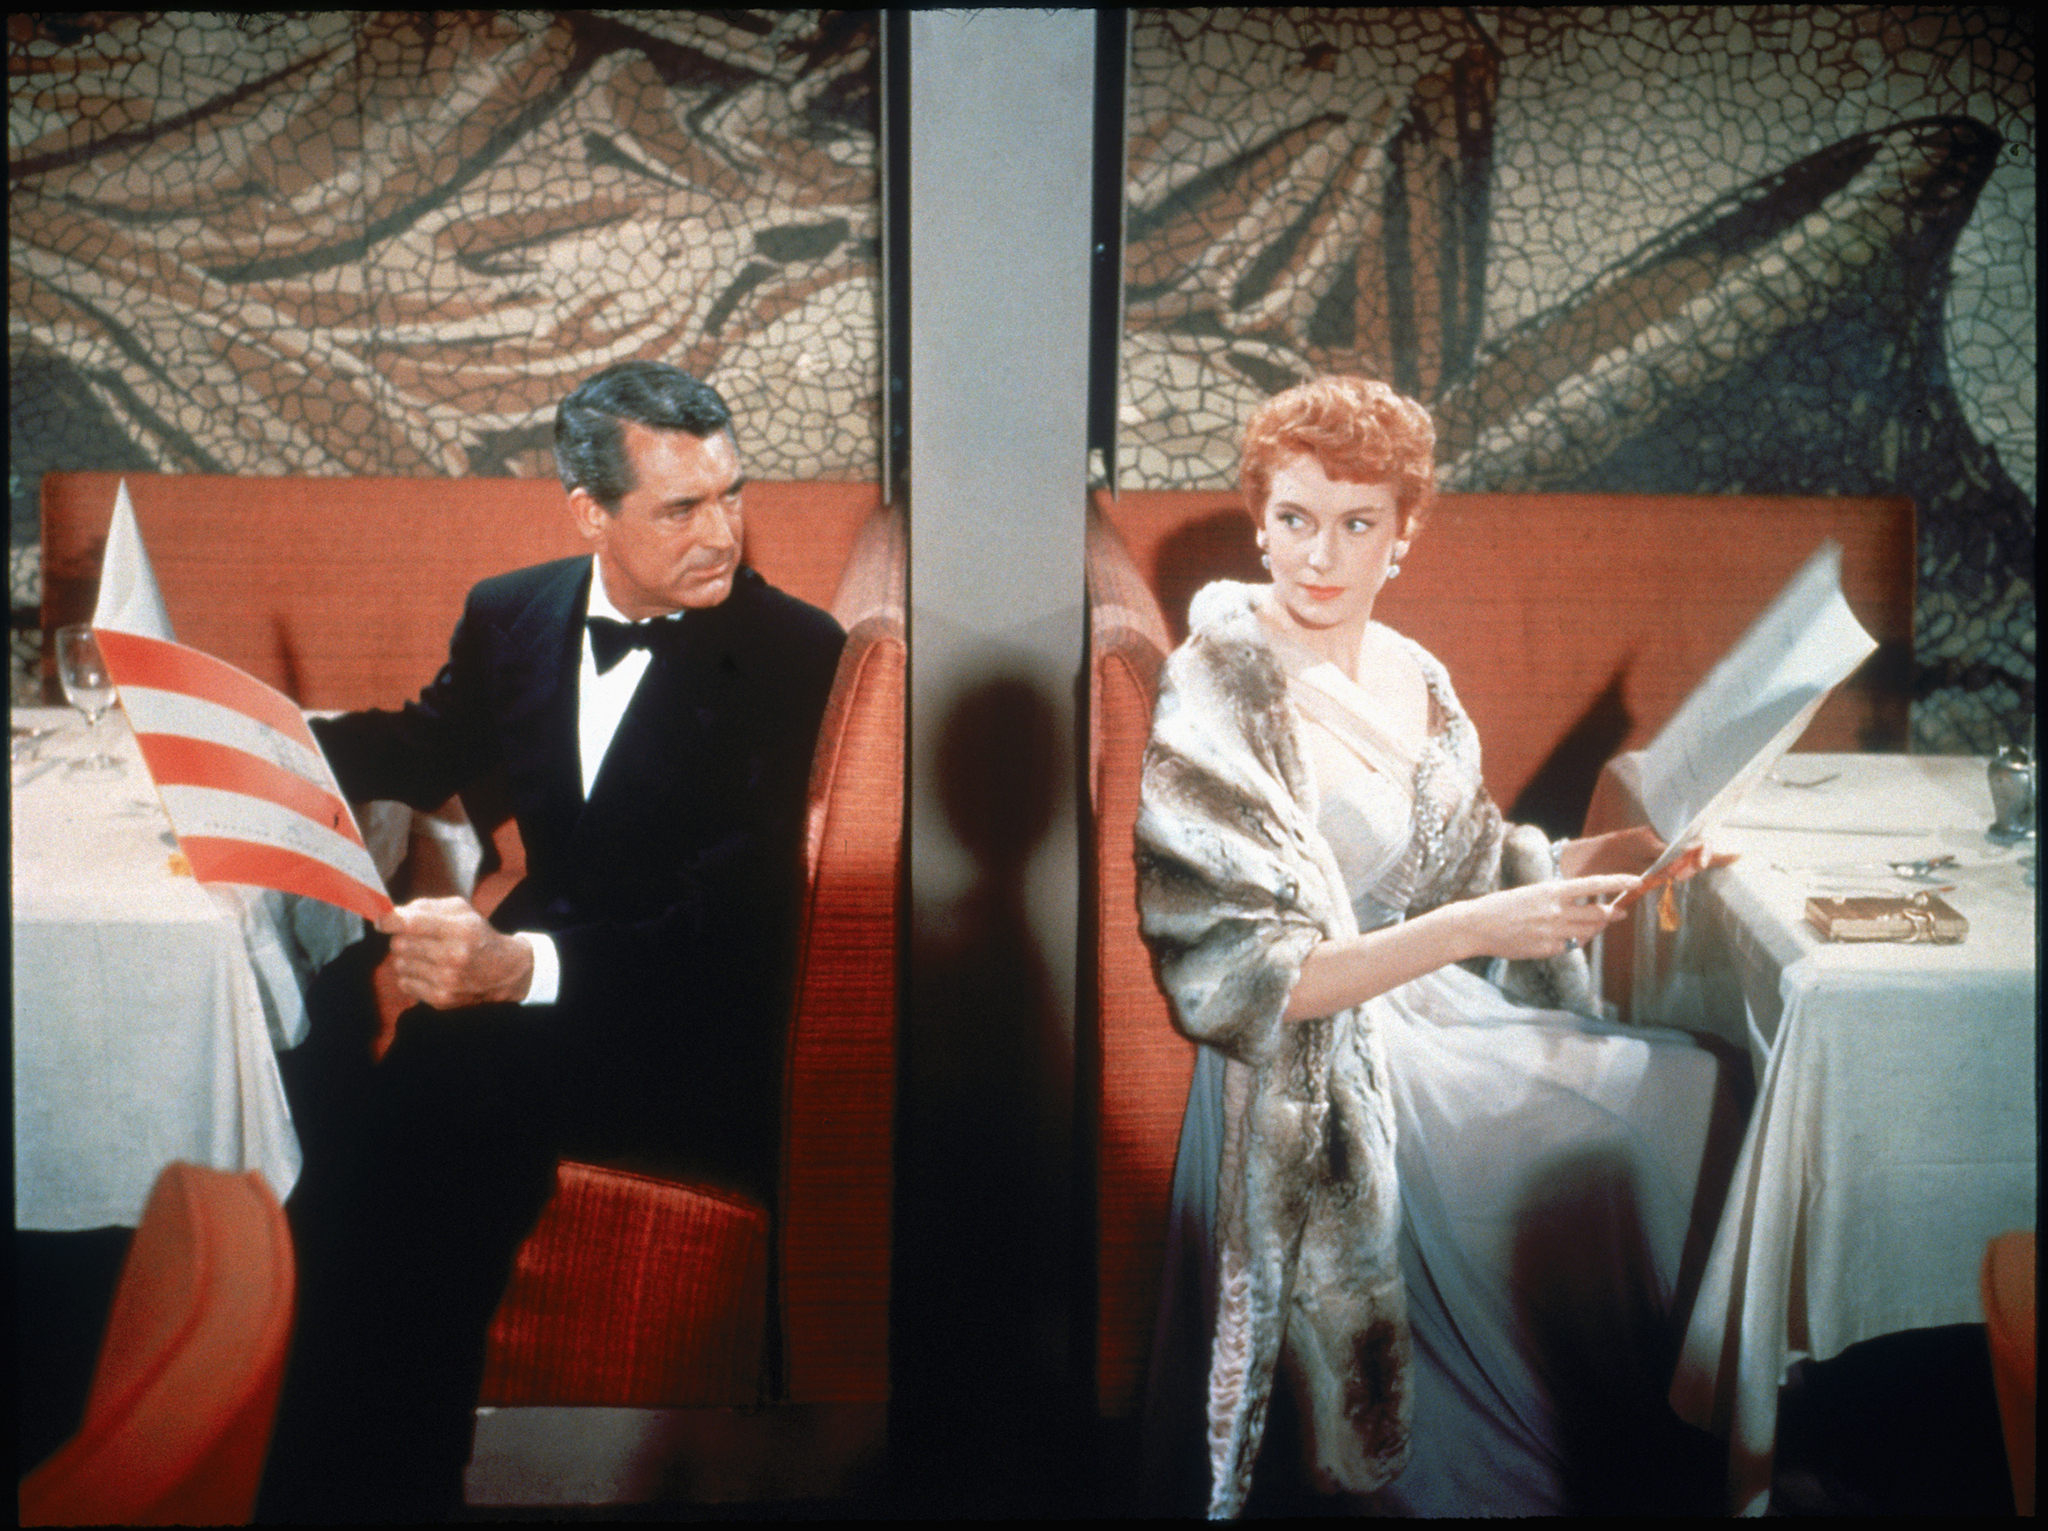 Still of Cary Grant and Deborah Kerr in An Affair to Remember (1957)